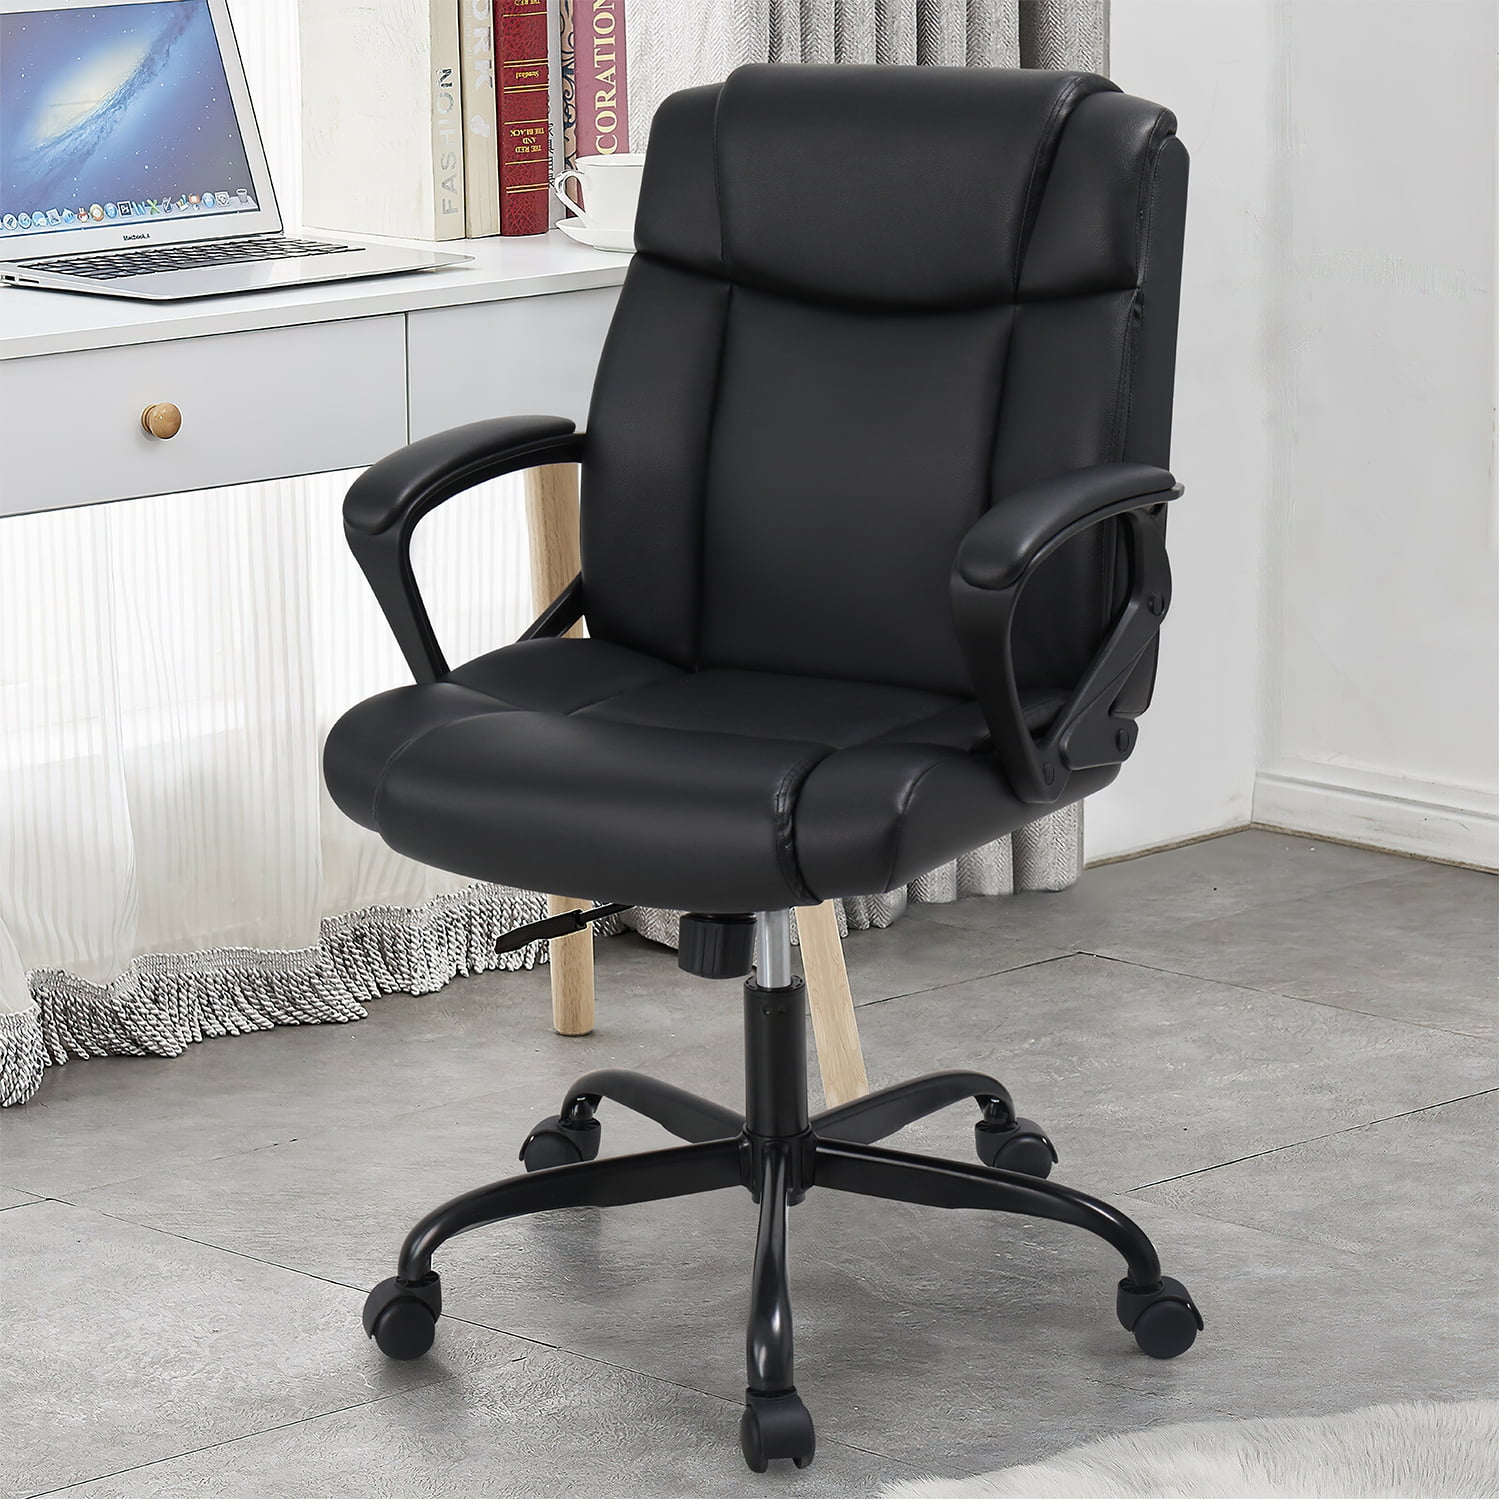 LACOO Black Big and High Back Office Chair, PU Leather Executive Computer  Chair with Lumbar Support T-OCBC7000 - The Home Depot